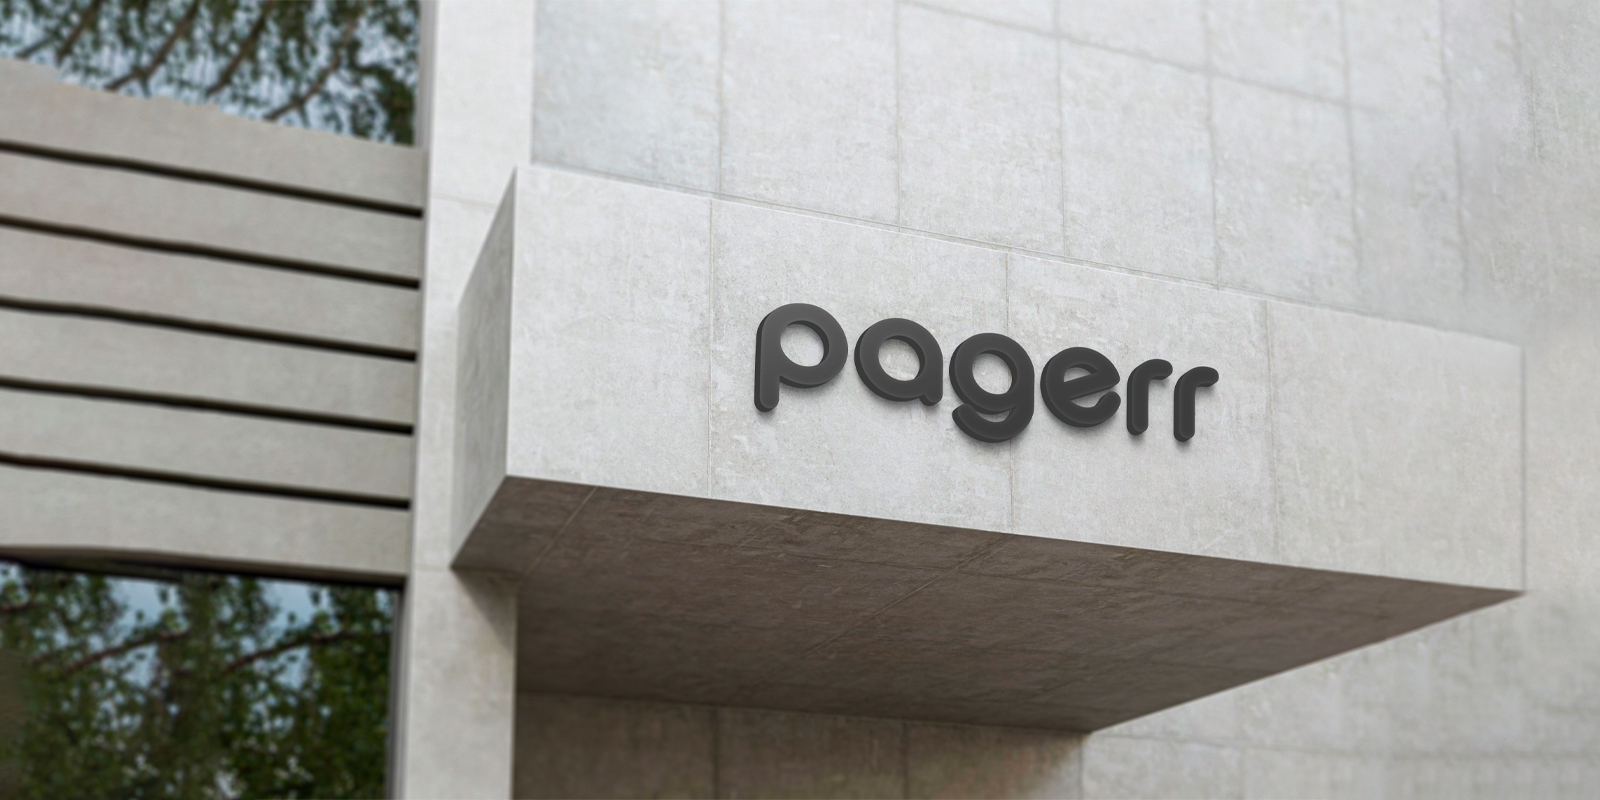 Logo signs in Canberra - Print with Pagerr